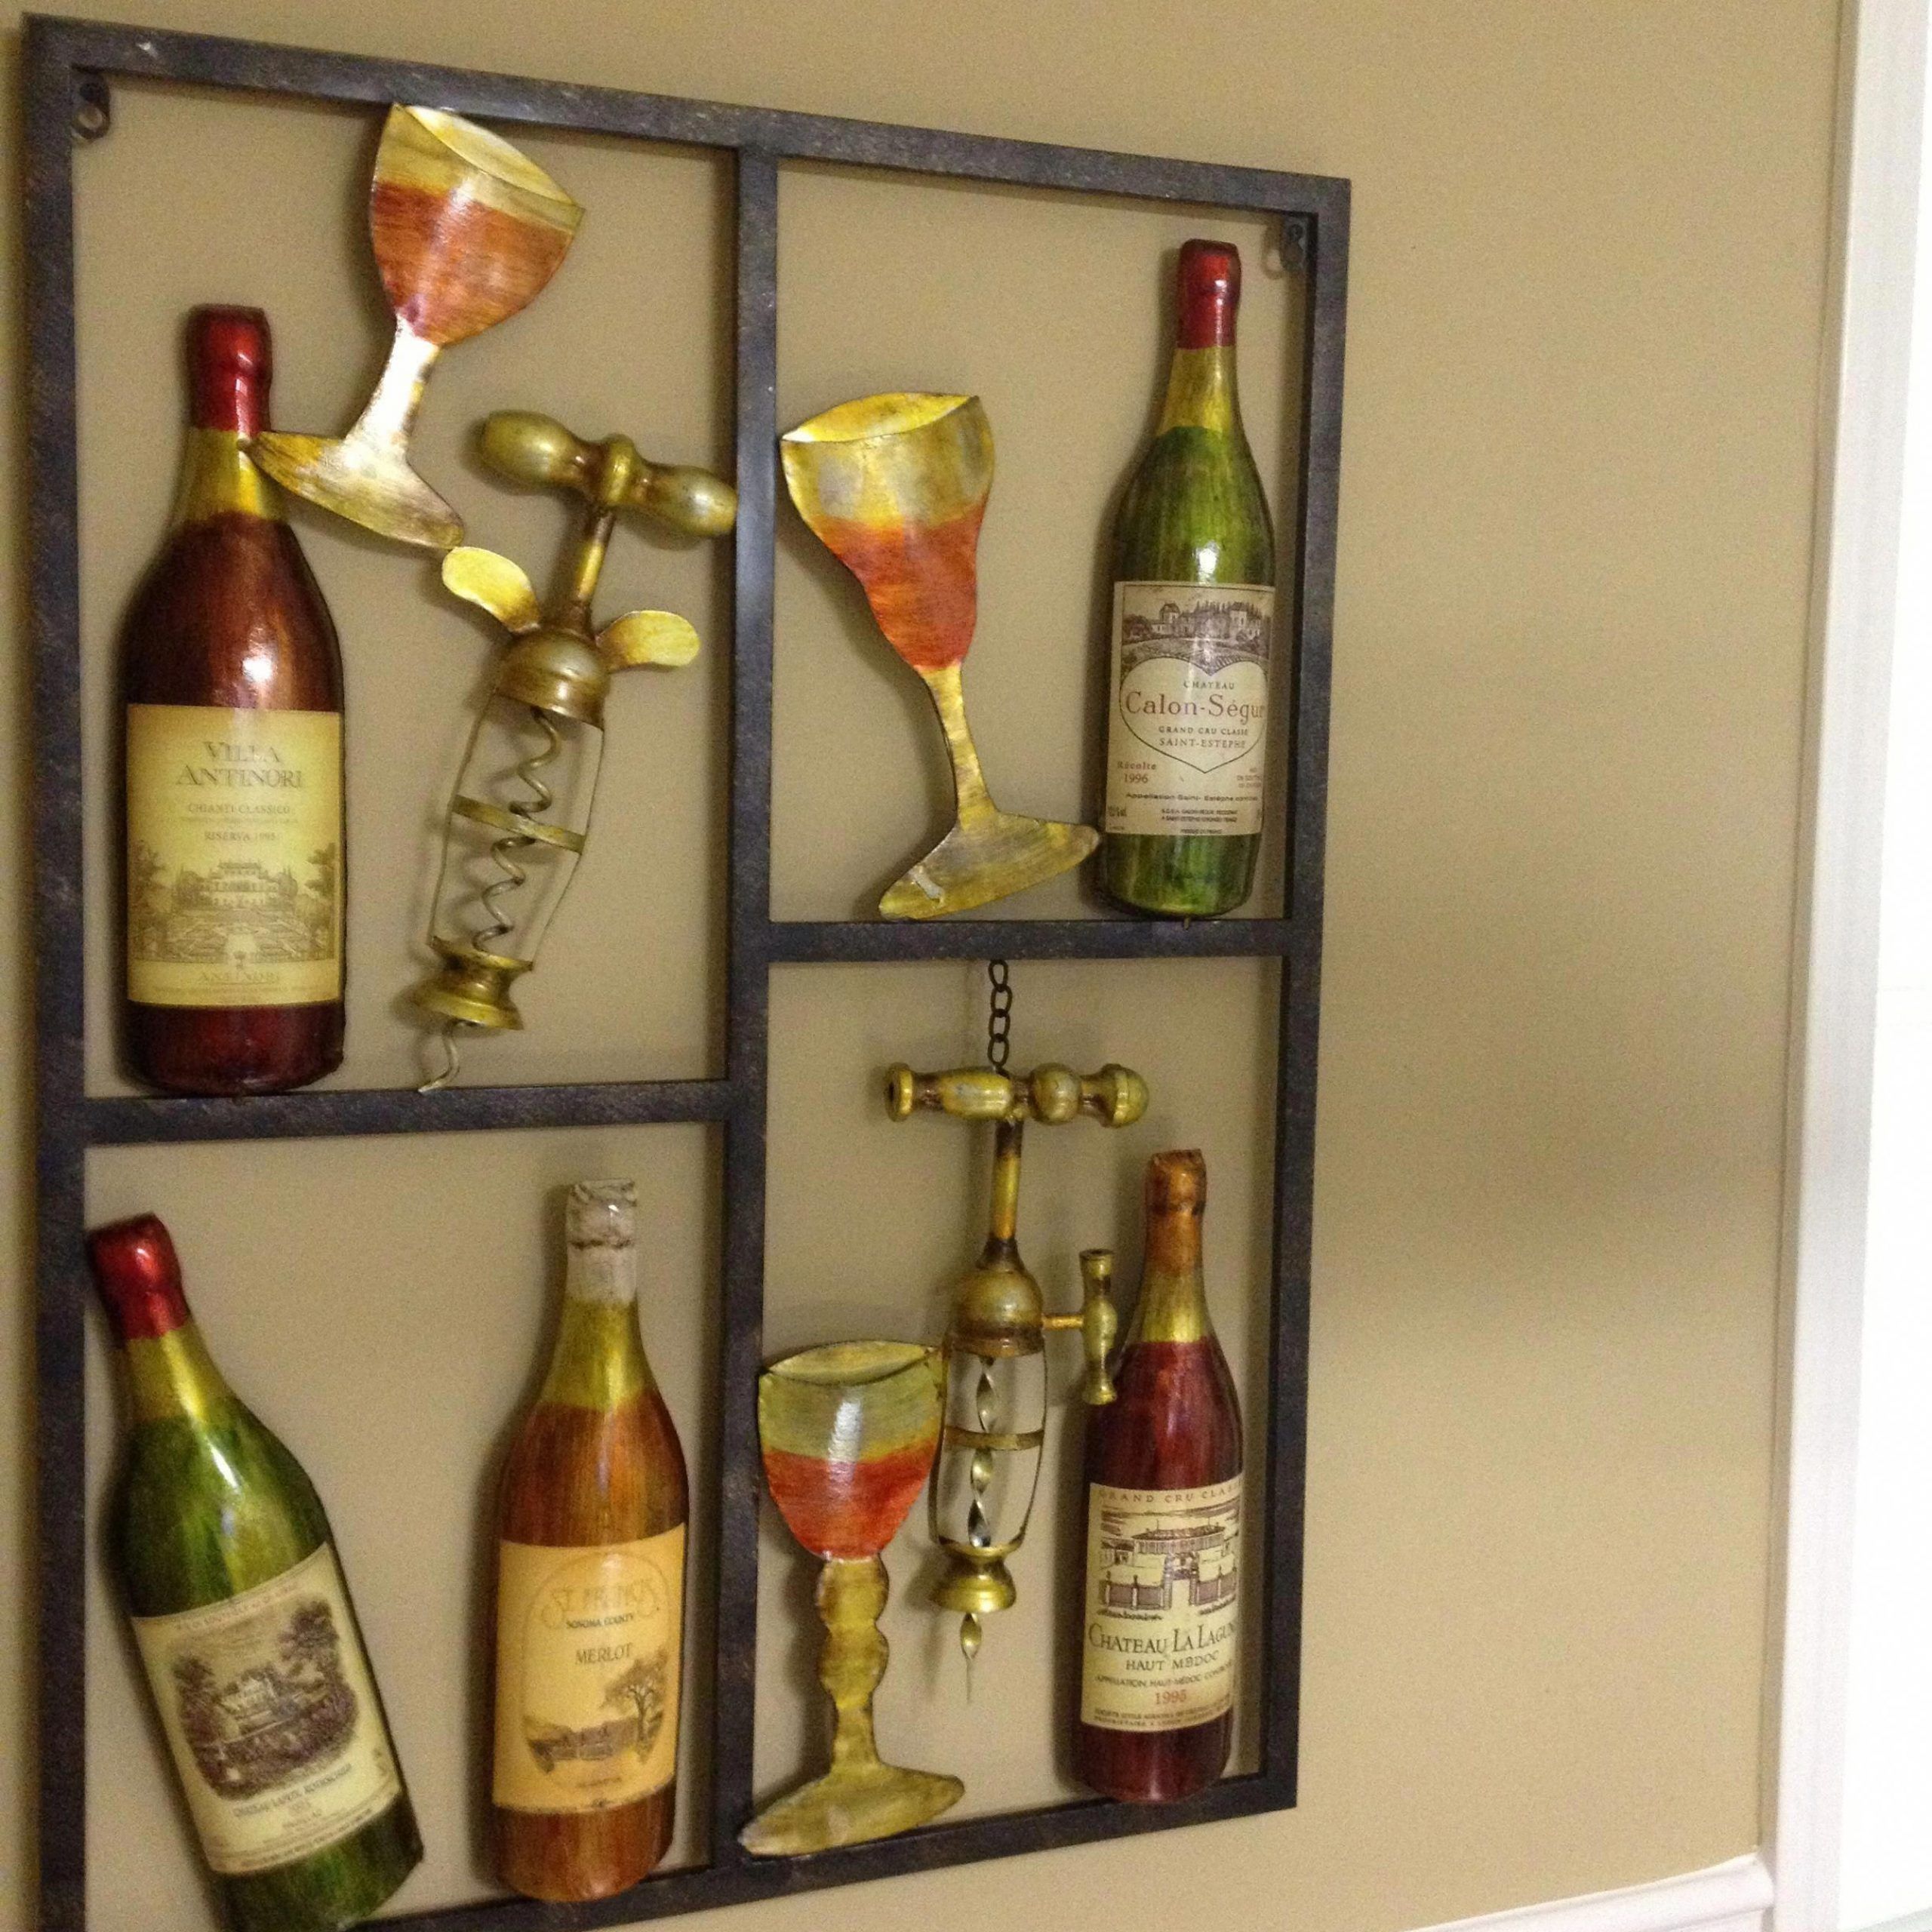 Wine Metal Wall Art For The Kitchen #tuscandecor | Wine Decor Kitchen For Latest Wine Wall Art (View 4 of 20)